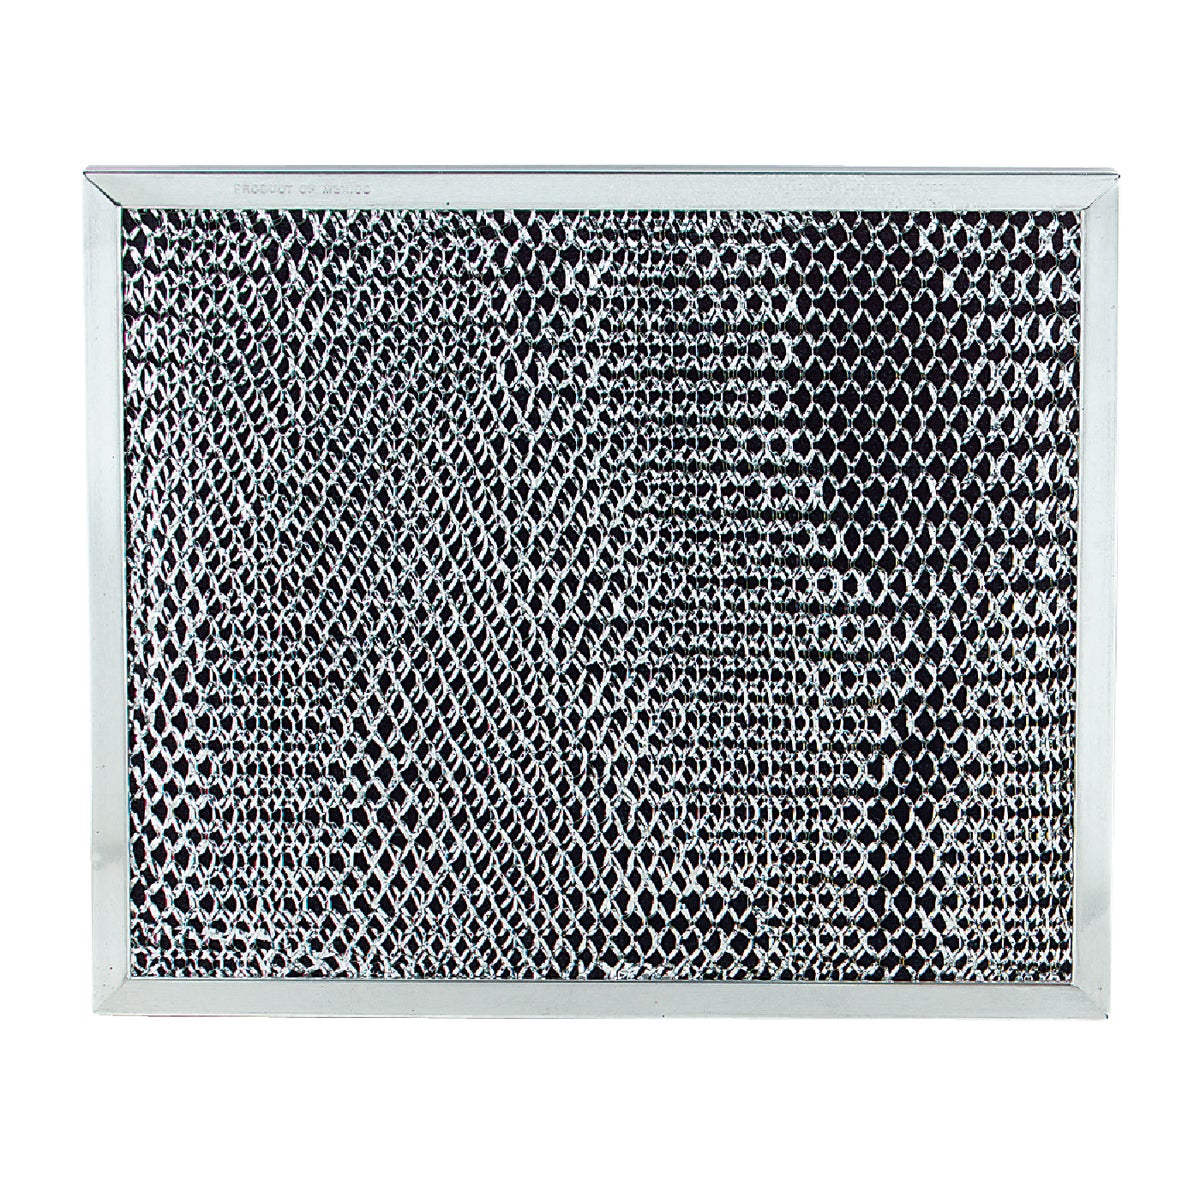 Item 264635, Exclusive Microtek high efficiency charcoal filter designed to provide the 